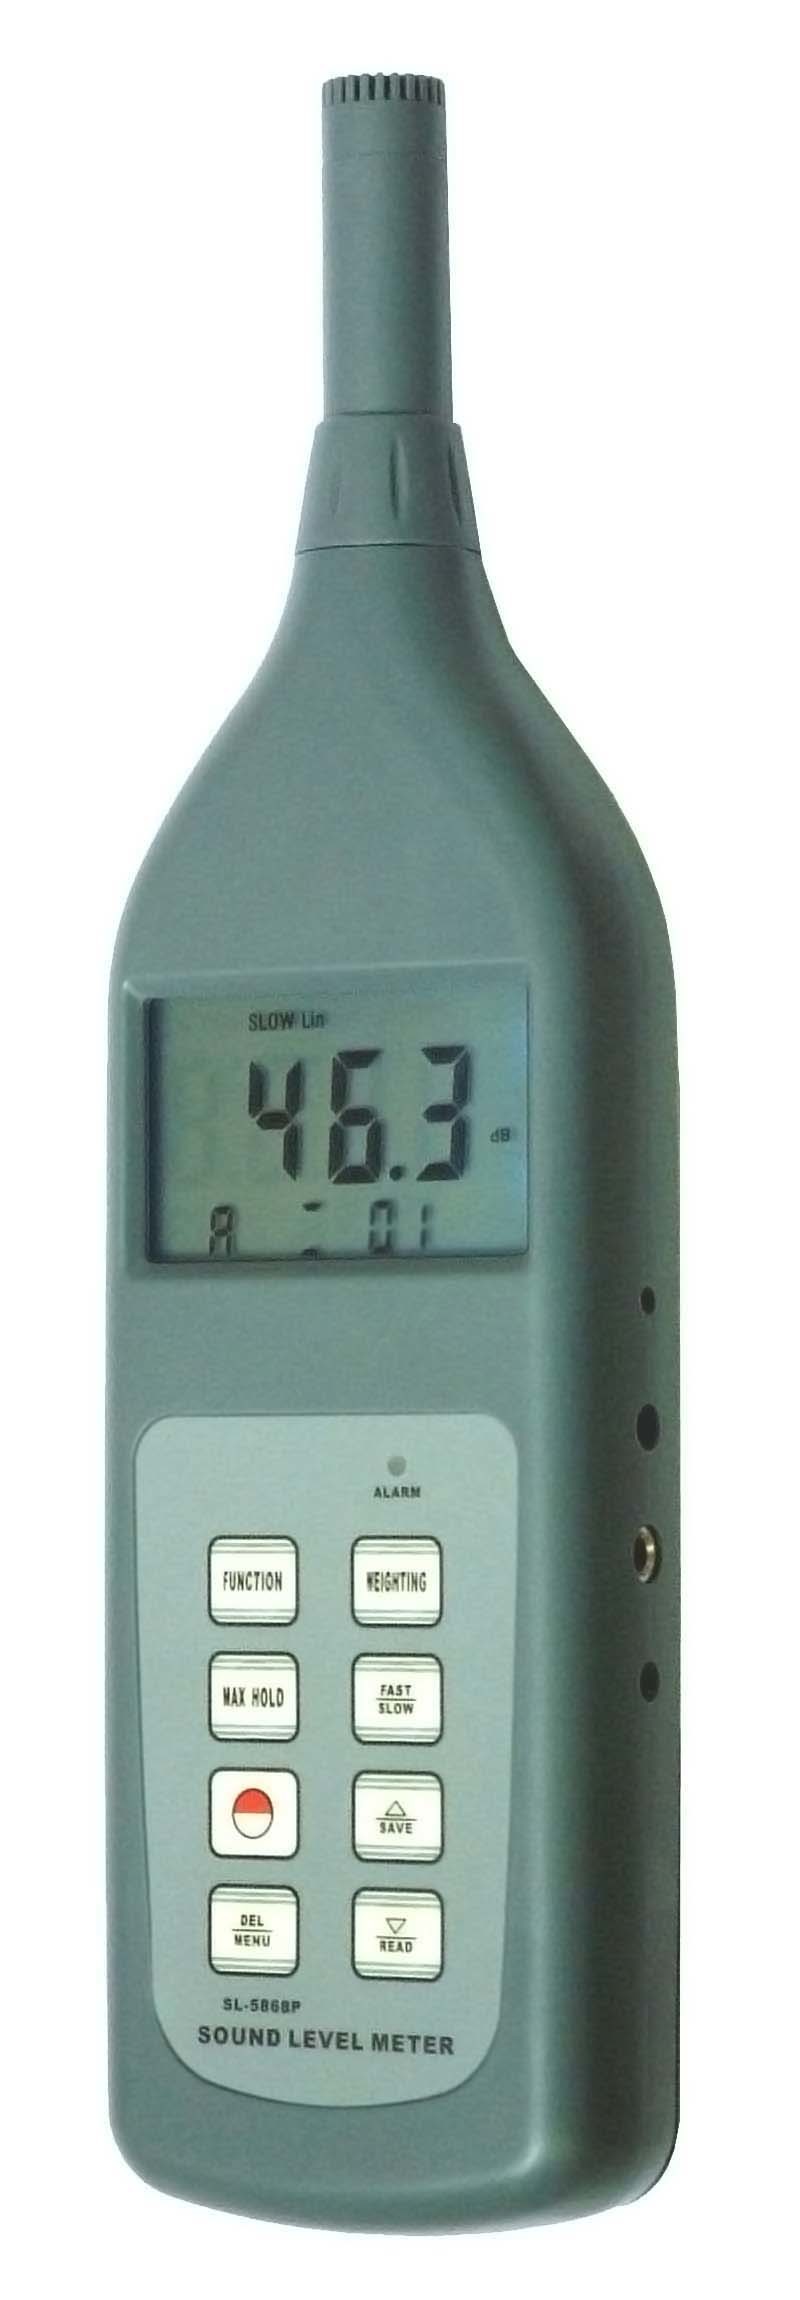 Buy cheap Sound Level Meter SL-5868P product